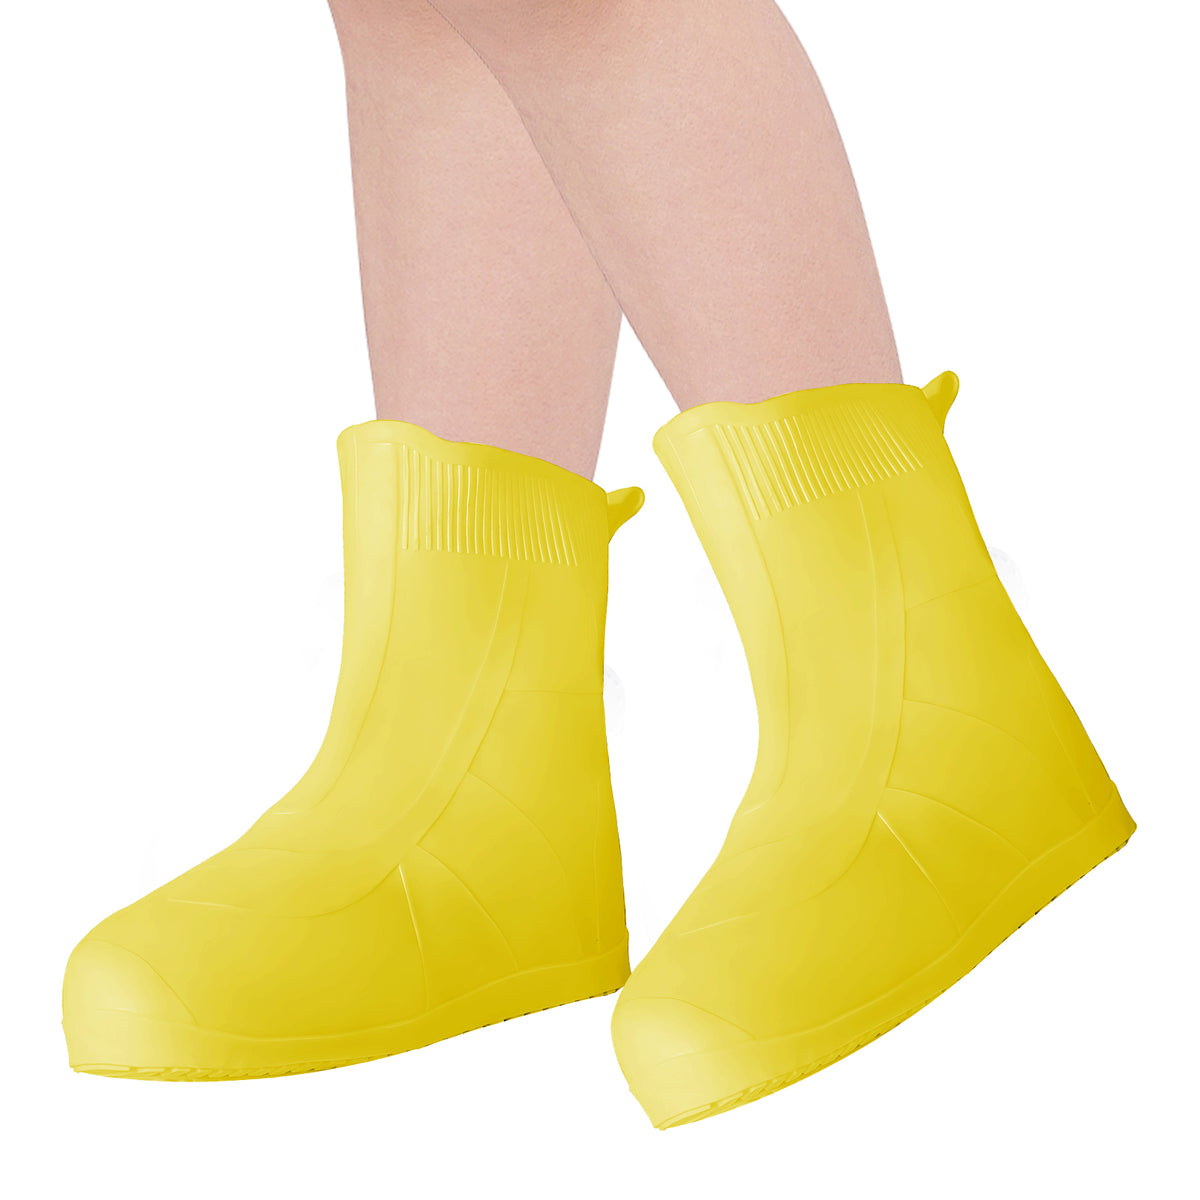 Adorila Kid Rain Silicone Shoe Covers, Anti-Slip Wear-Resistant and Portable Waterproof Shoe Covers, Kid Shoe Covers for Outdoor Home Travel Rain Boots (Yellow, L)